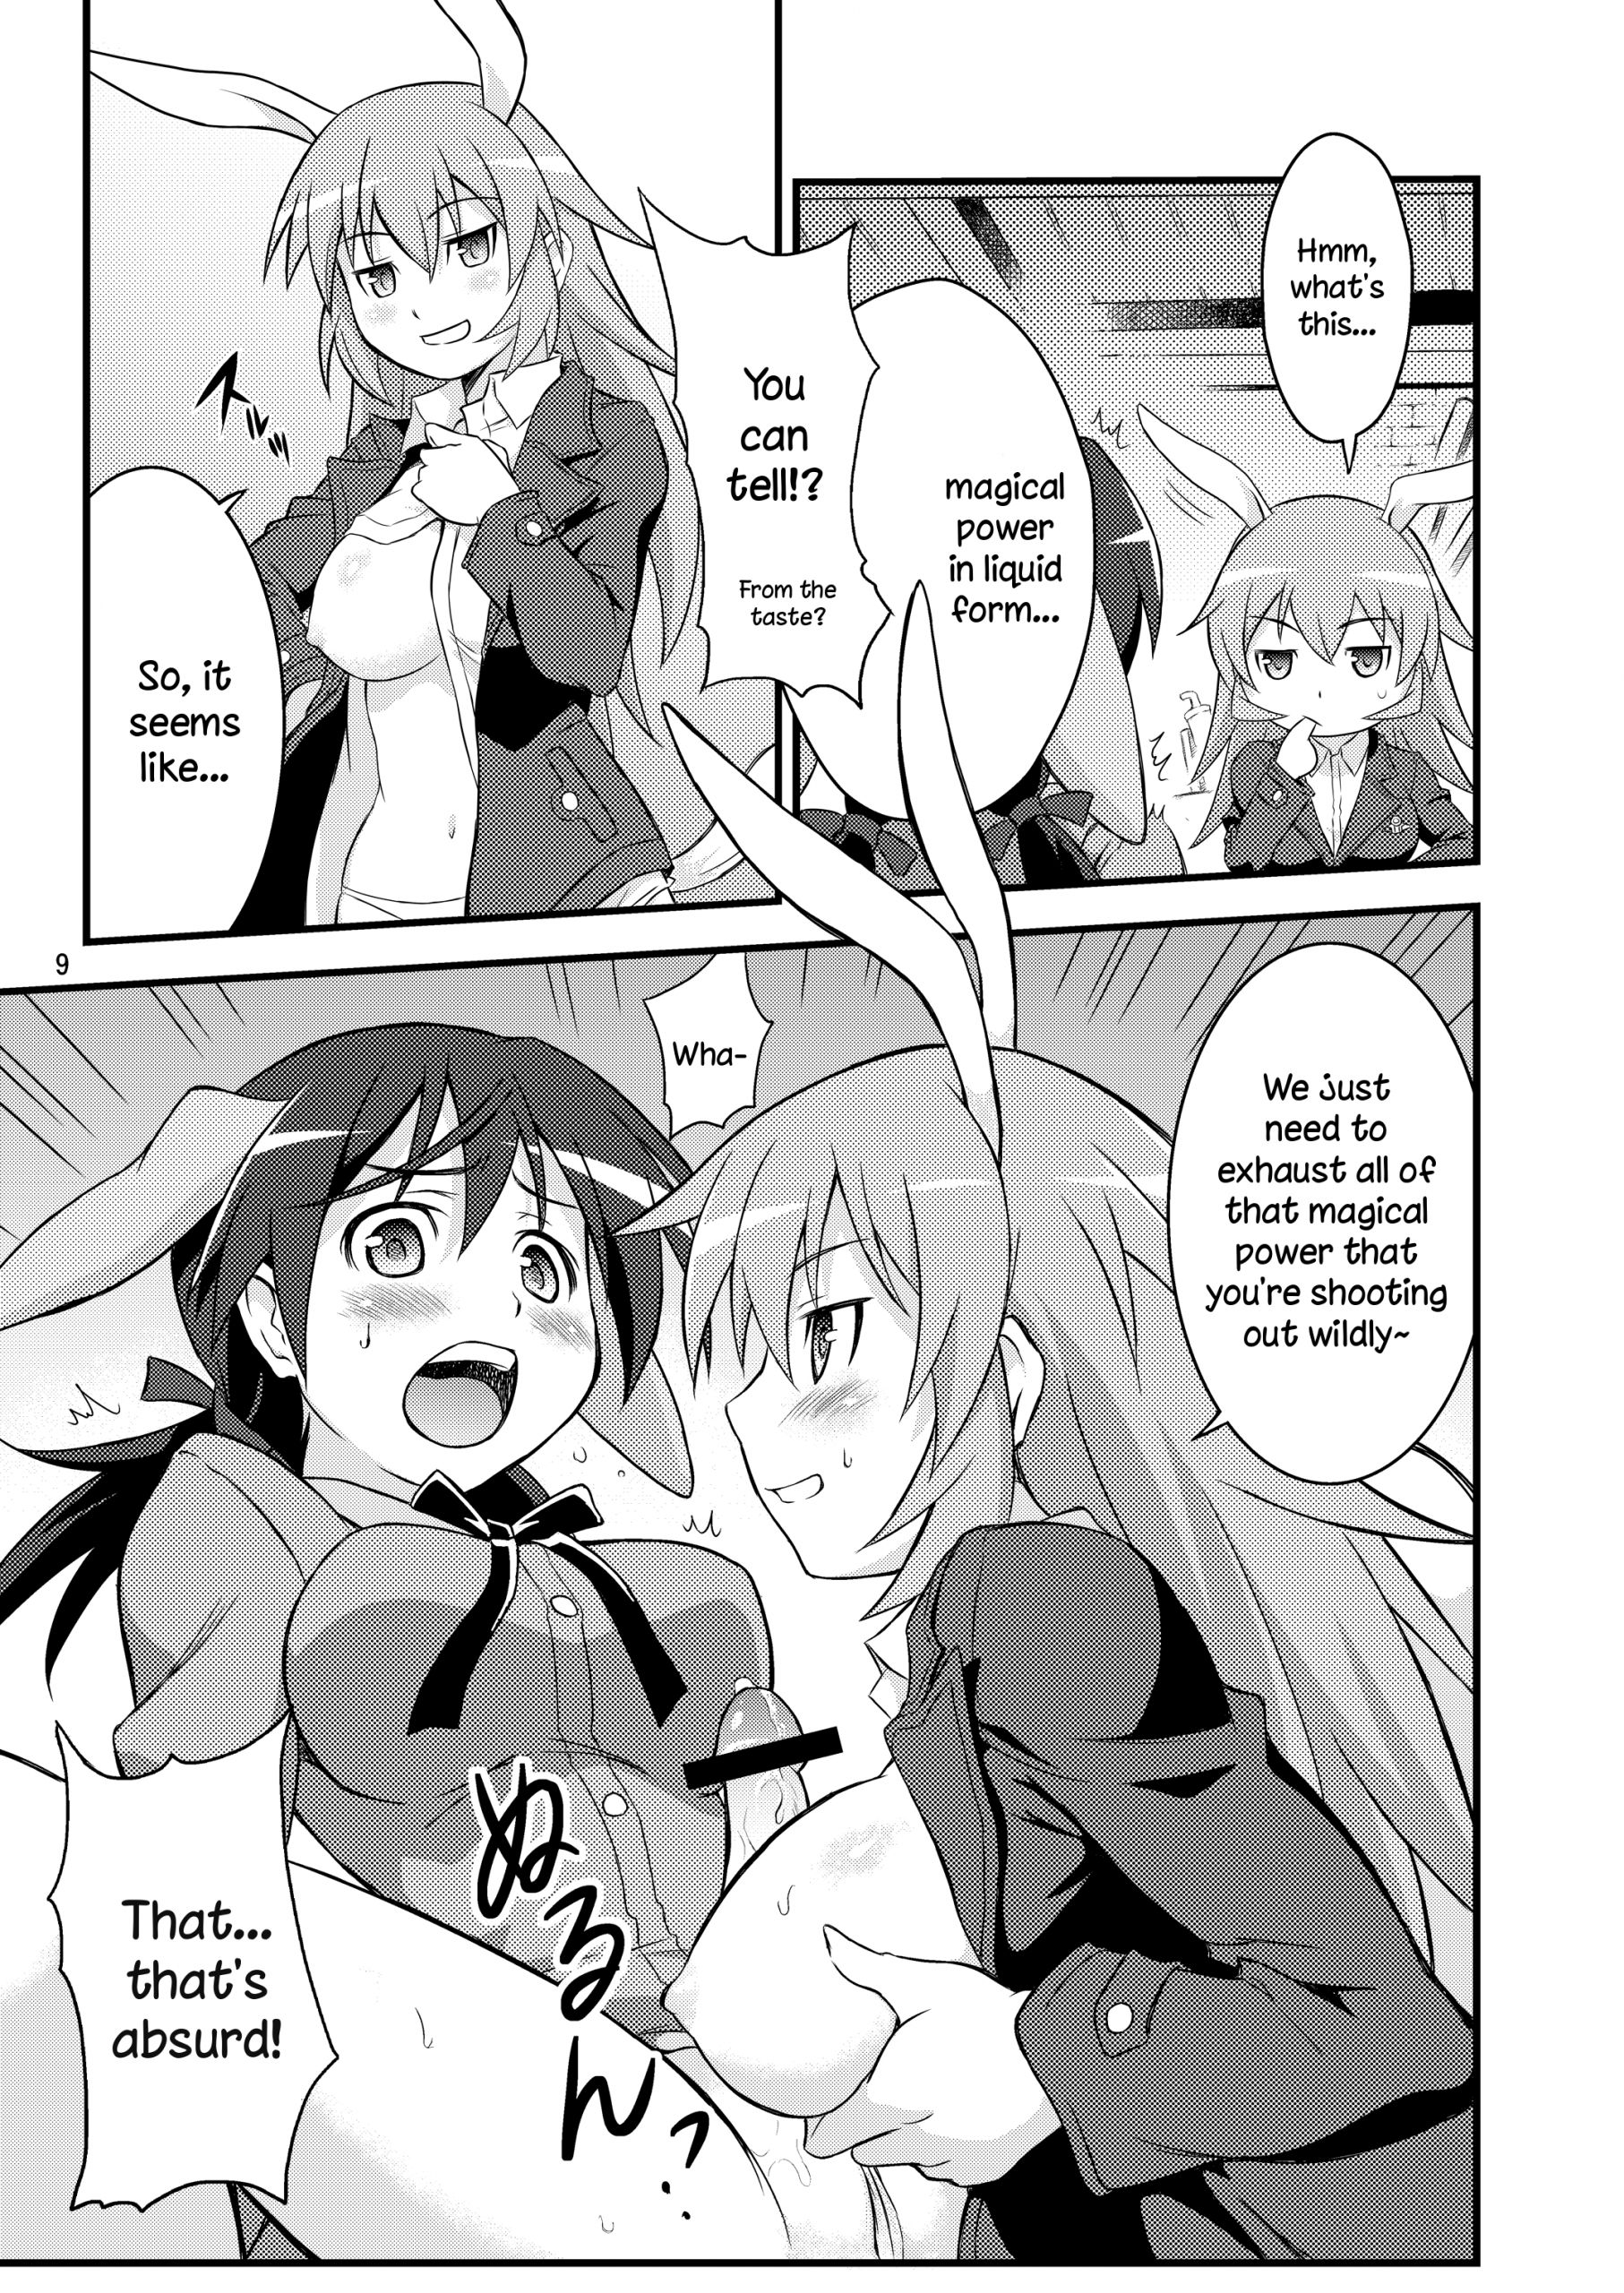 Shir and Gert in Big Trouble hentai manga picture 8